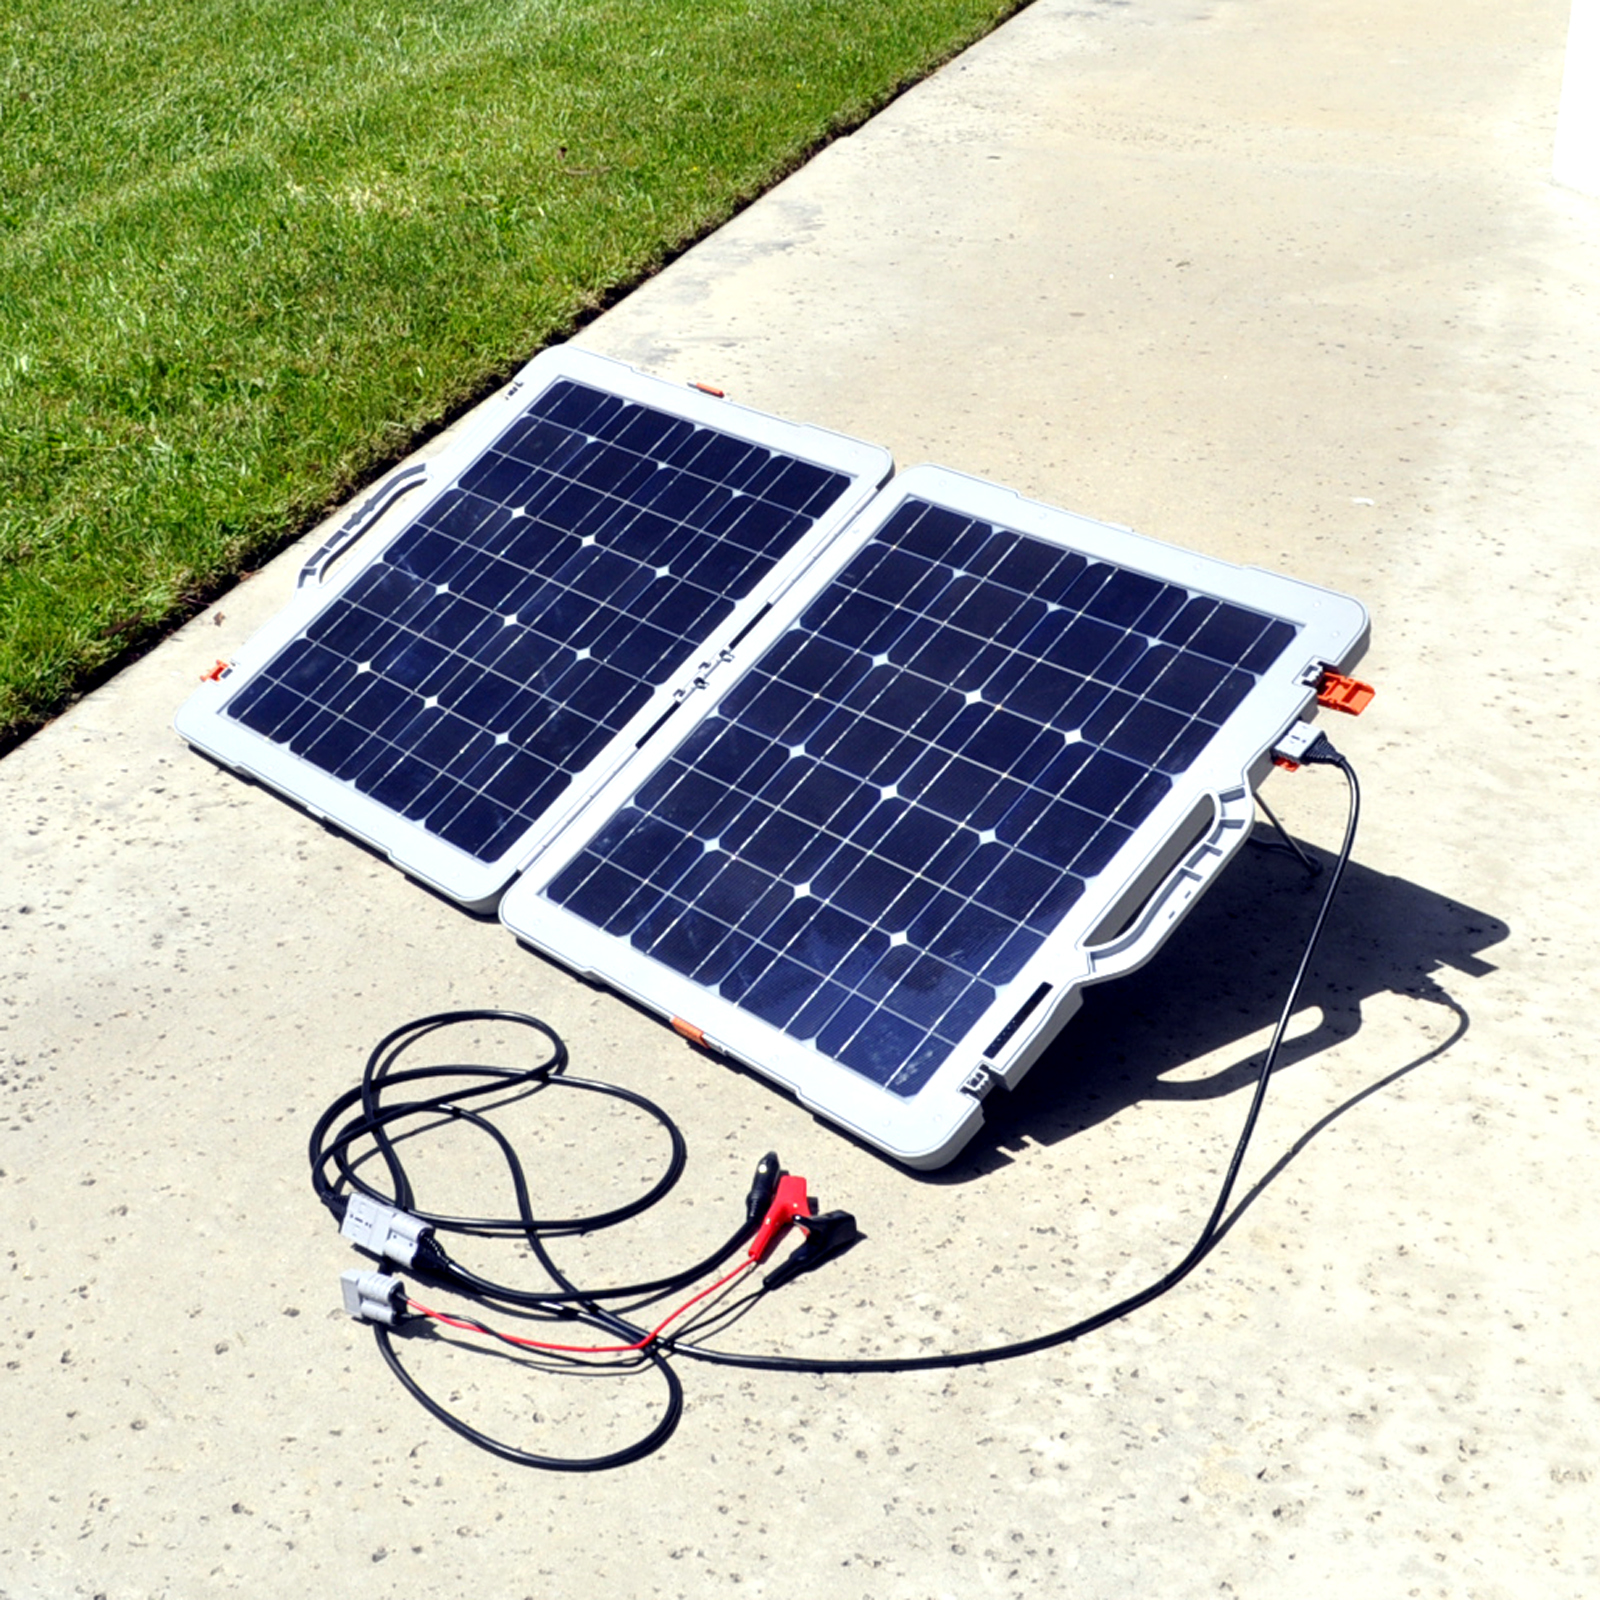 Global Solar Battery Charger Market Professional Survey Report 2017 -Planet Market Reports